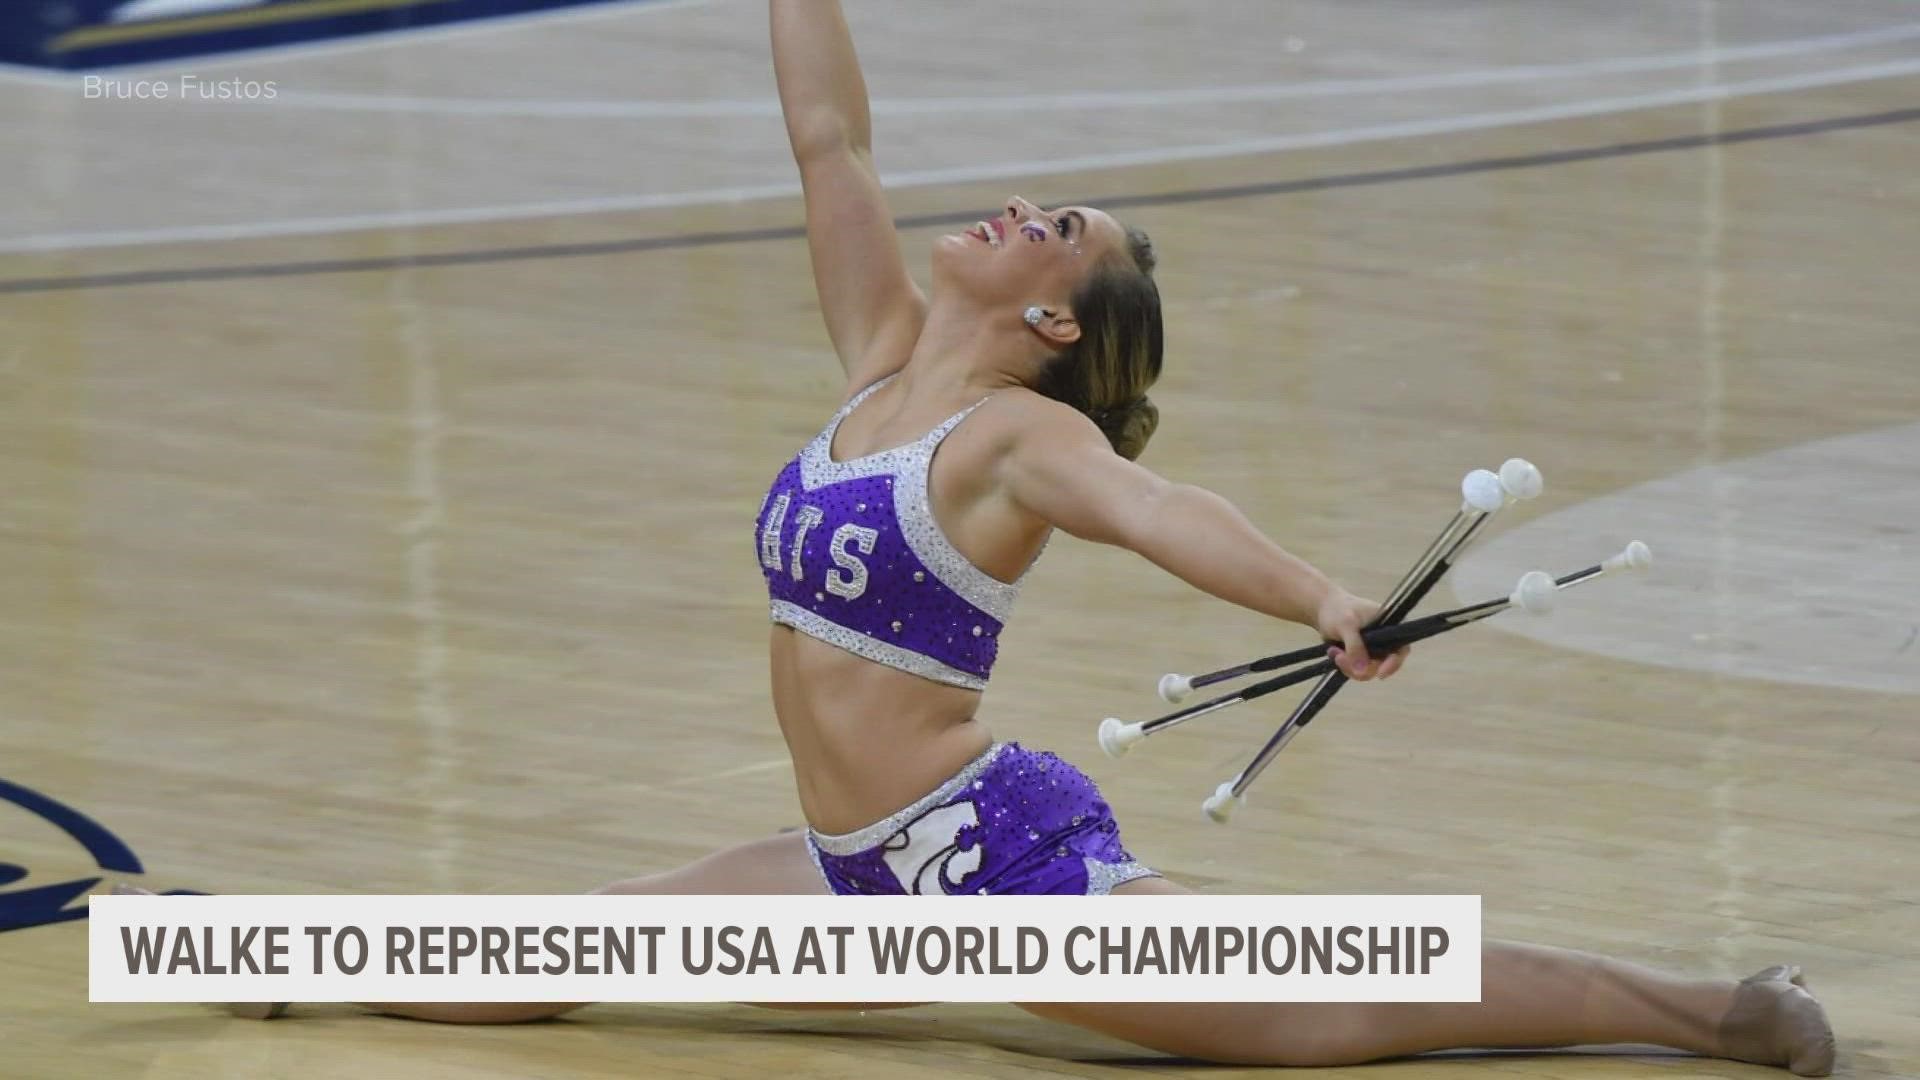 Bailey Walke will represent the United States at the IBTF World Baton Twirling Championship in Liverpool, England on August 4-13.